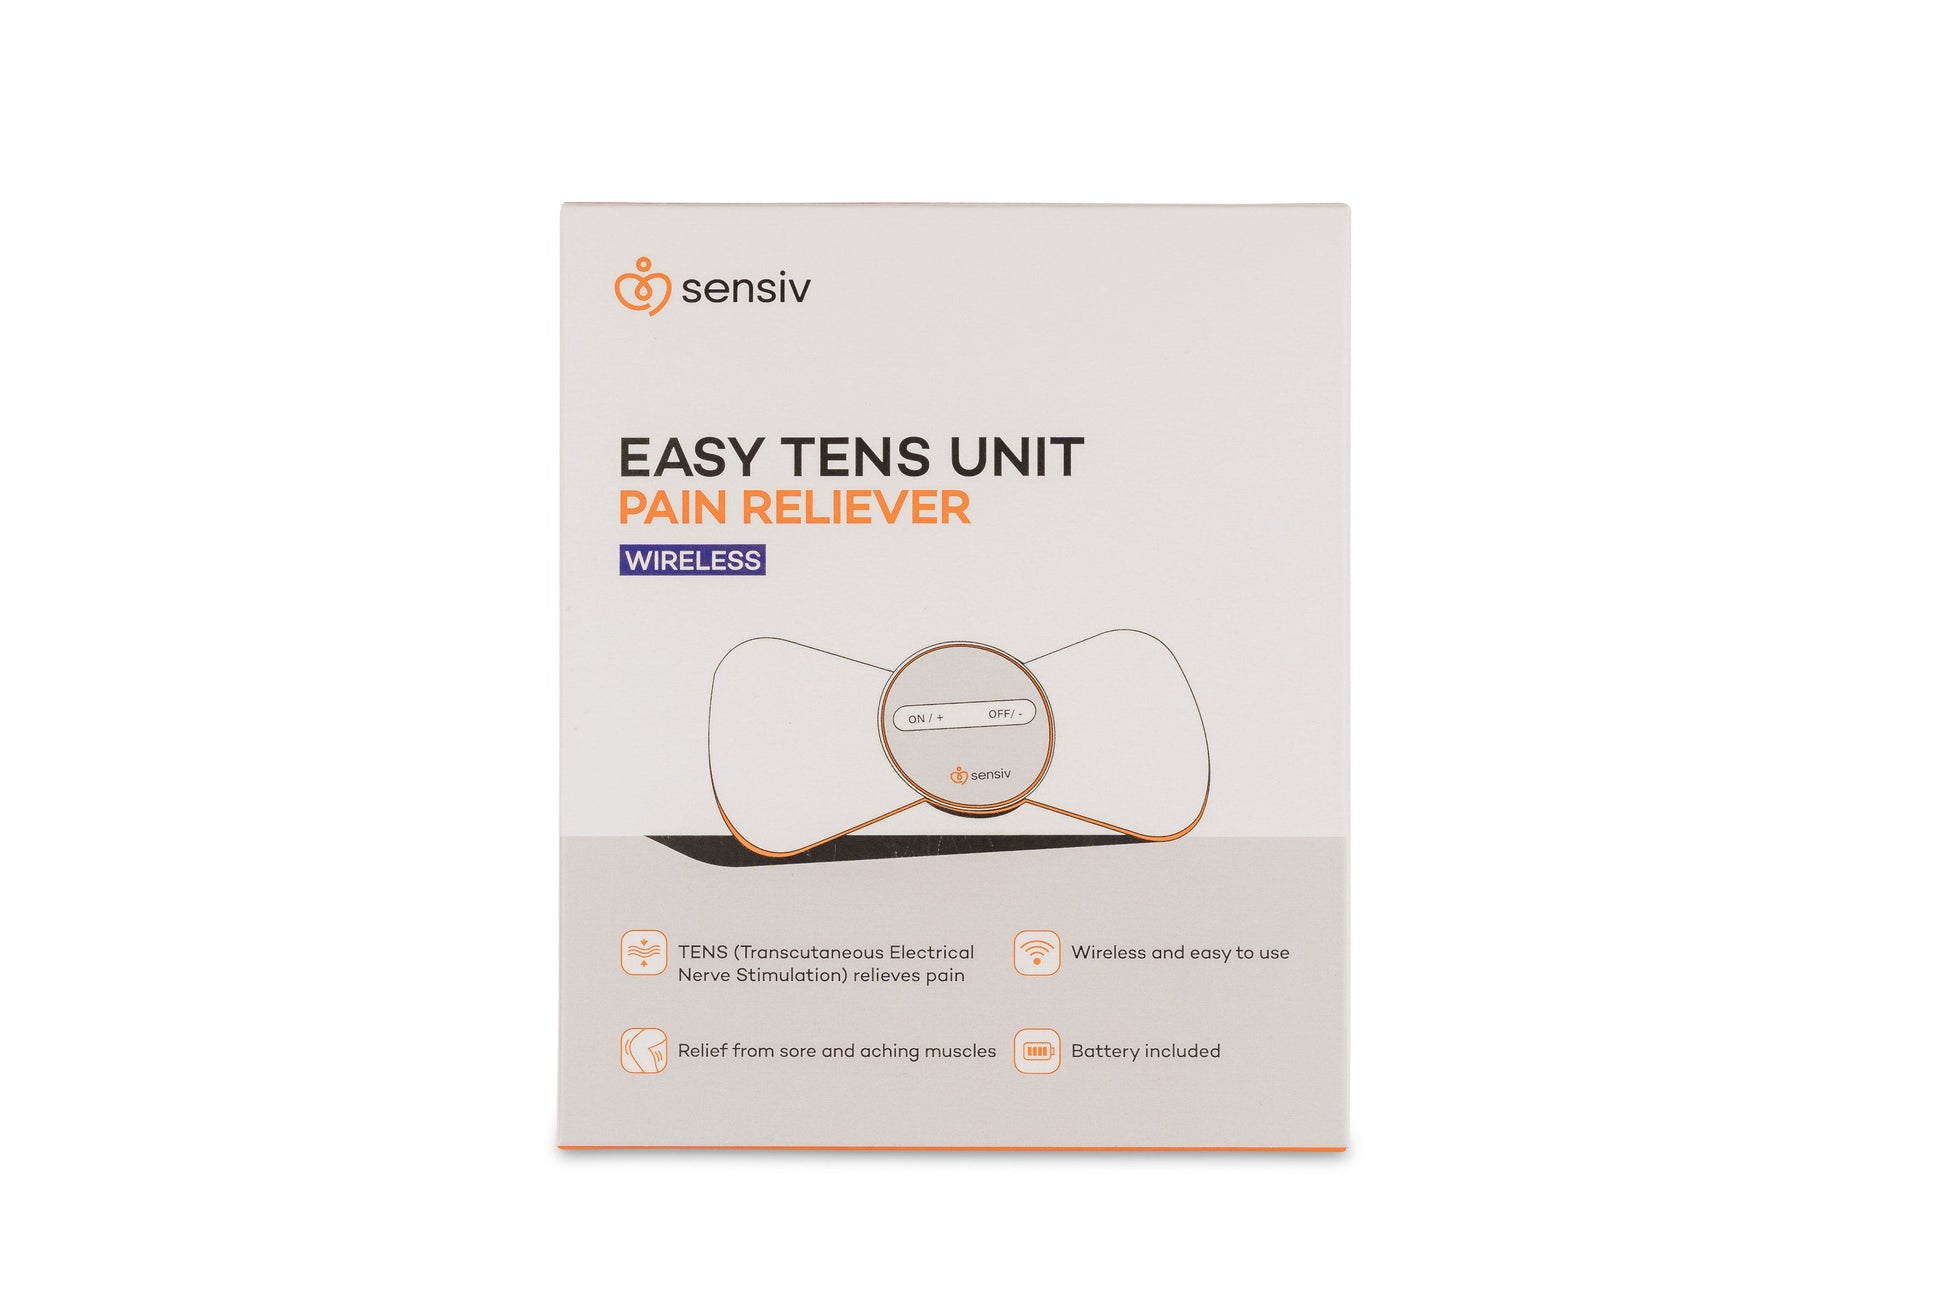 FSA-Approved Sensiv Tens Large Replacement Pads 2 Pack